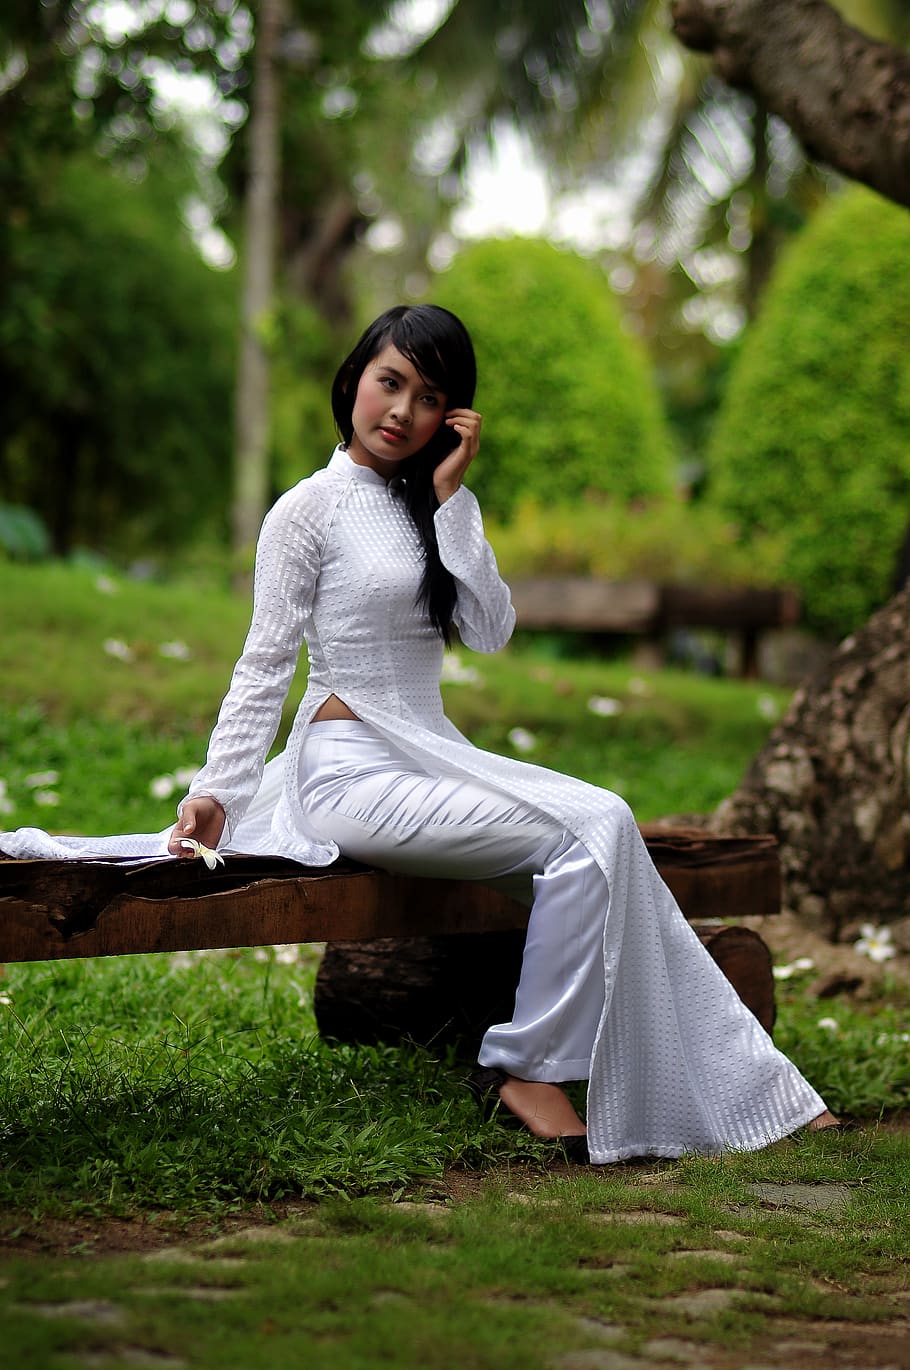 Woman Sitting on Bench Wearing White Long-sleeved Dress Selective Focus Photography, HD wallpaper